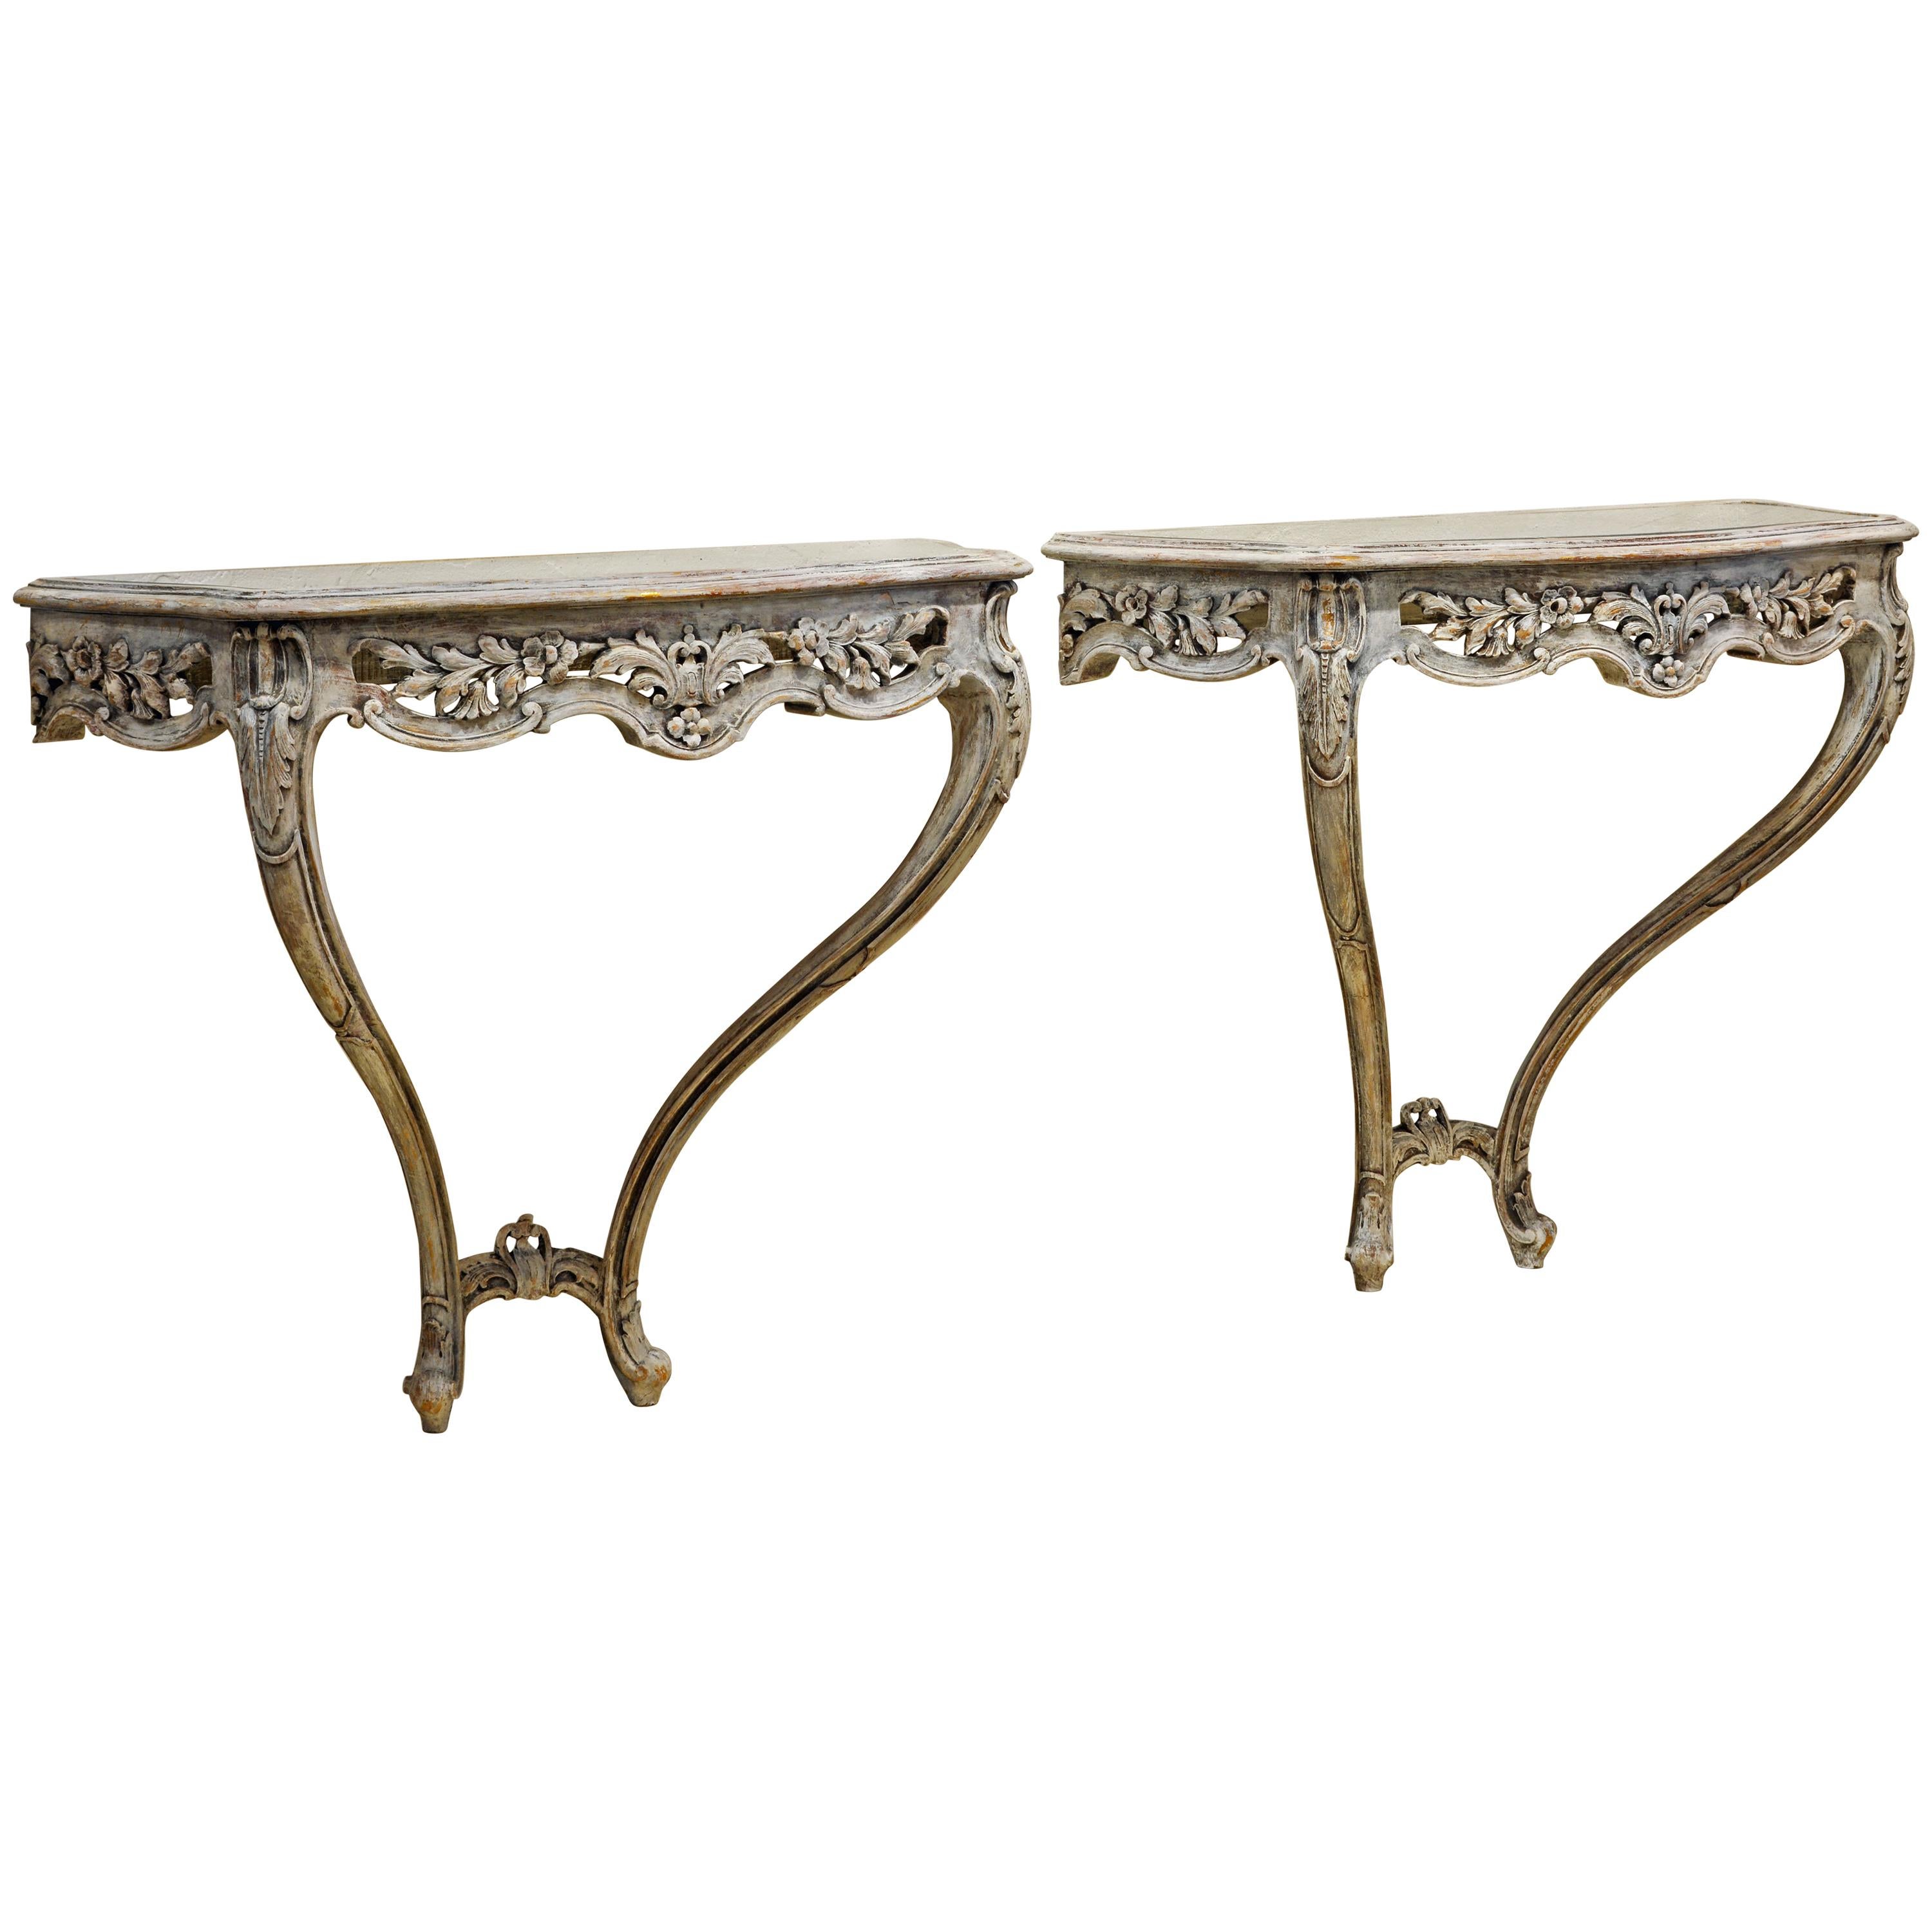 Pair of Italian Gray Painted Carved Rococo Style Mirror Top Console Tables